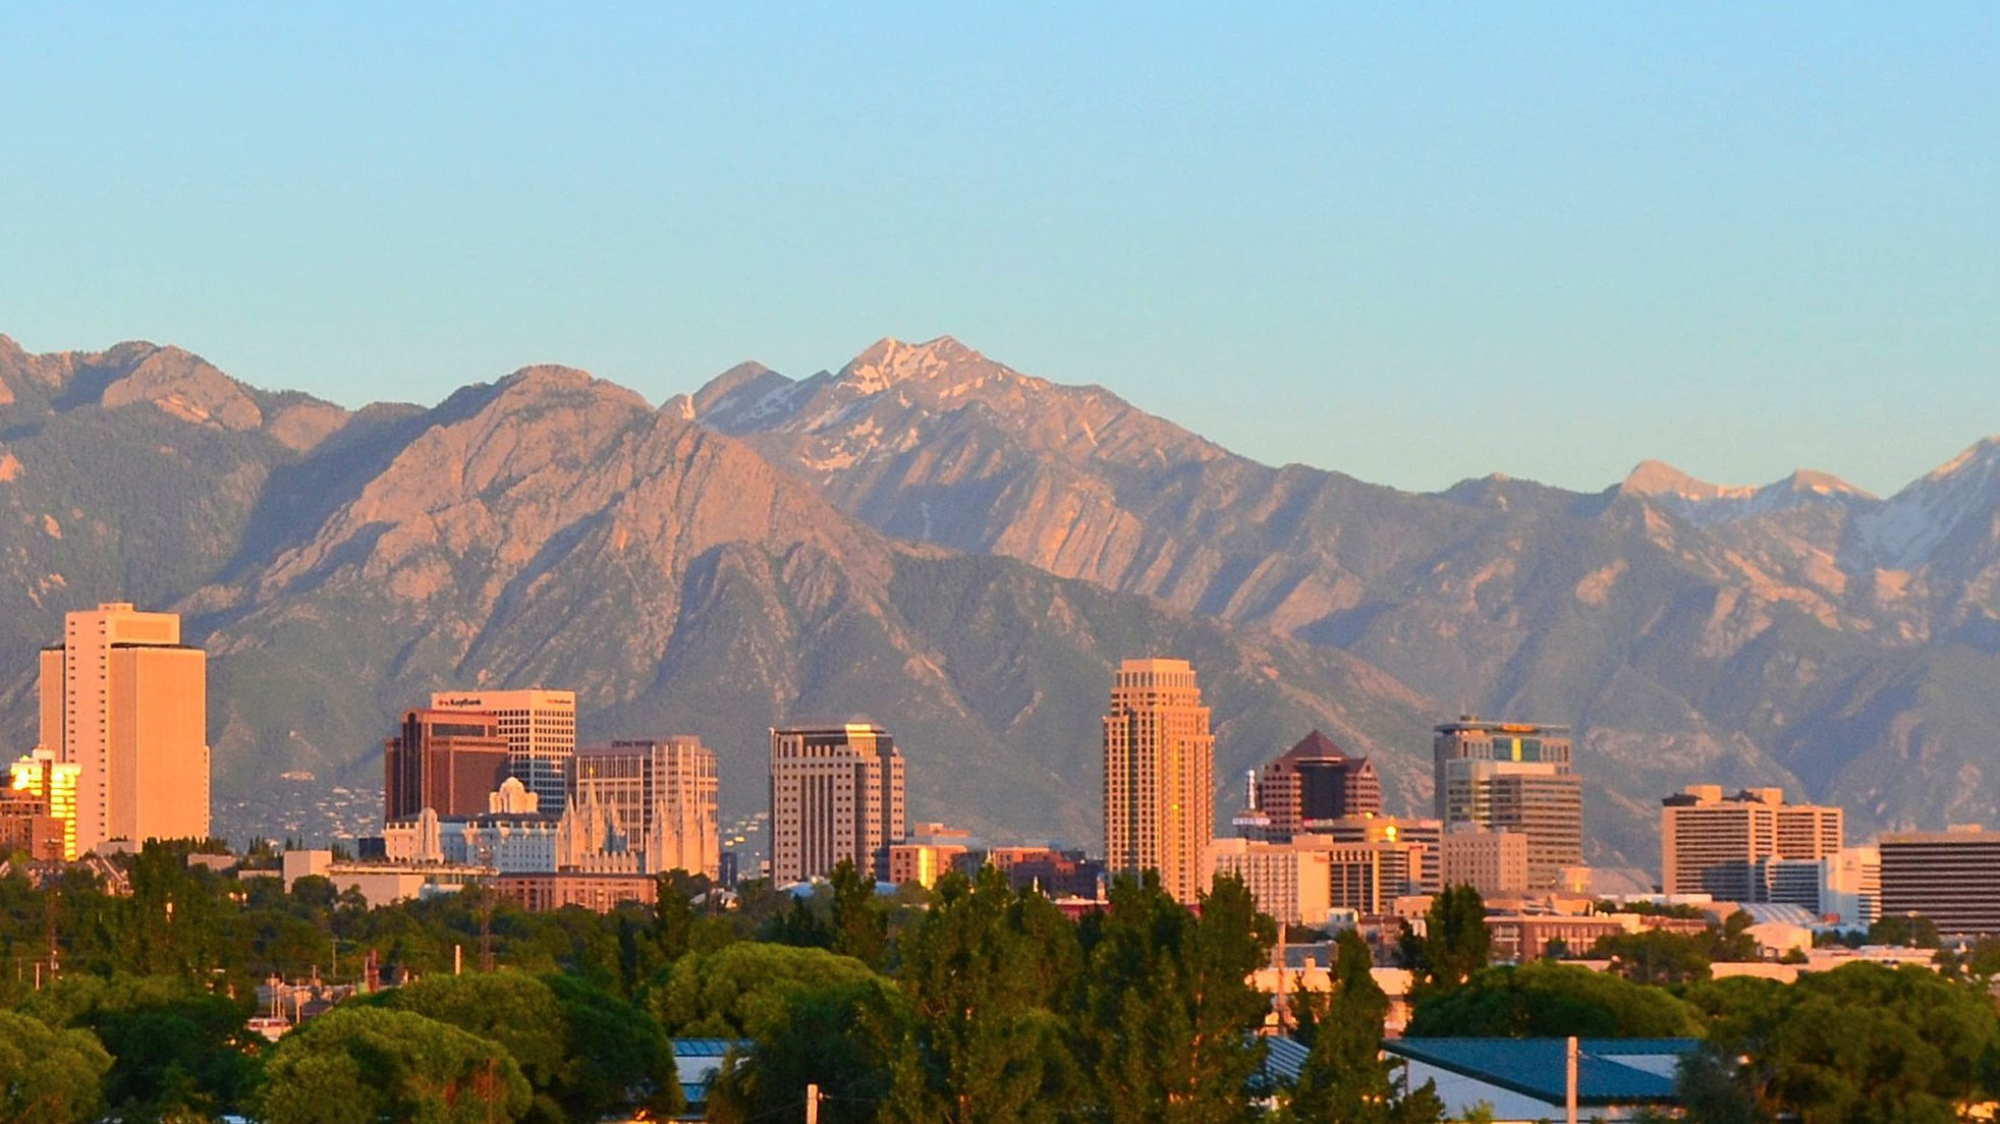 Tall buildings in Salt Lake City against the Wasatch Mountains, under a blue sky